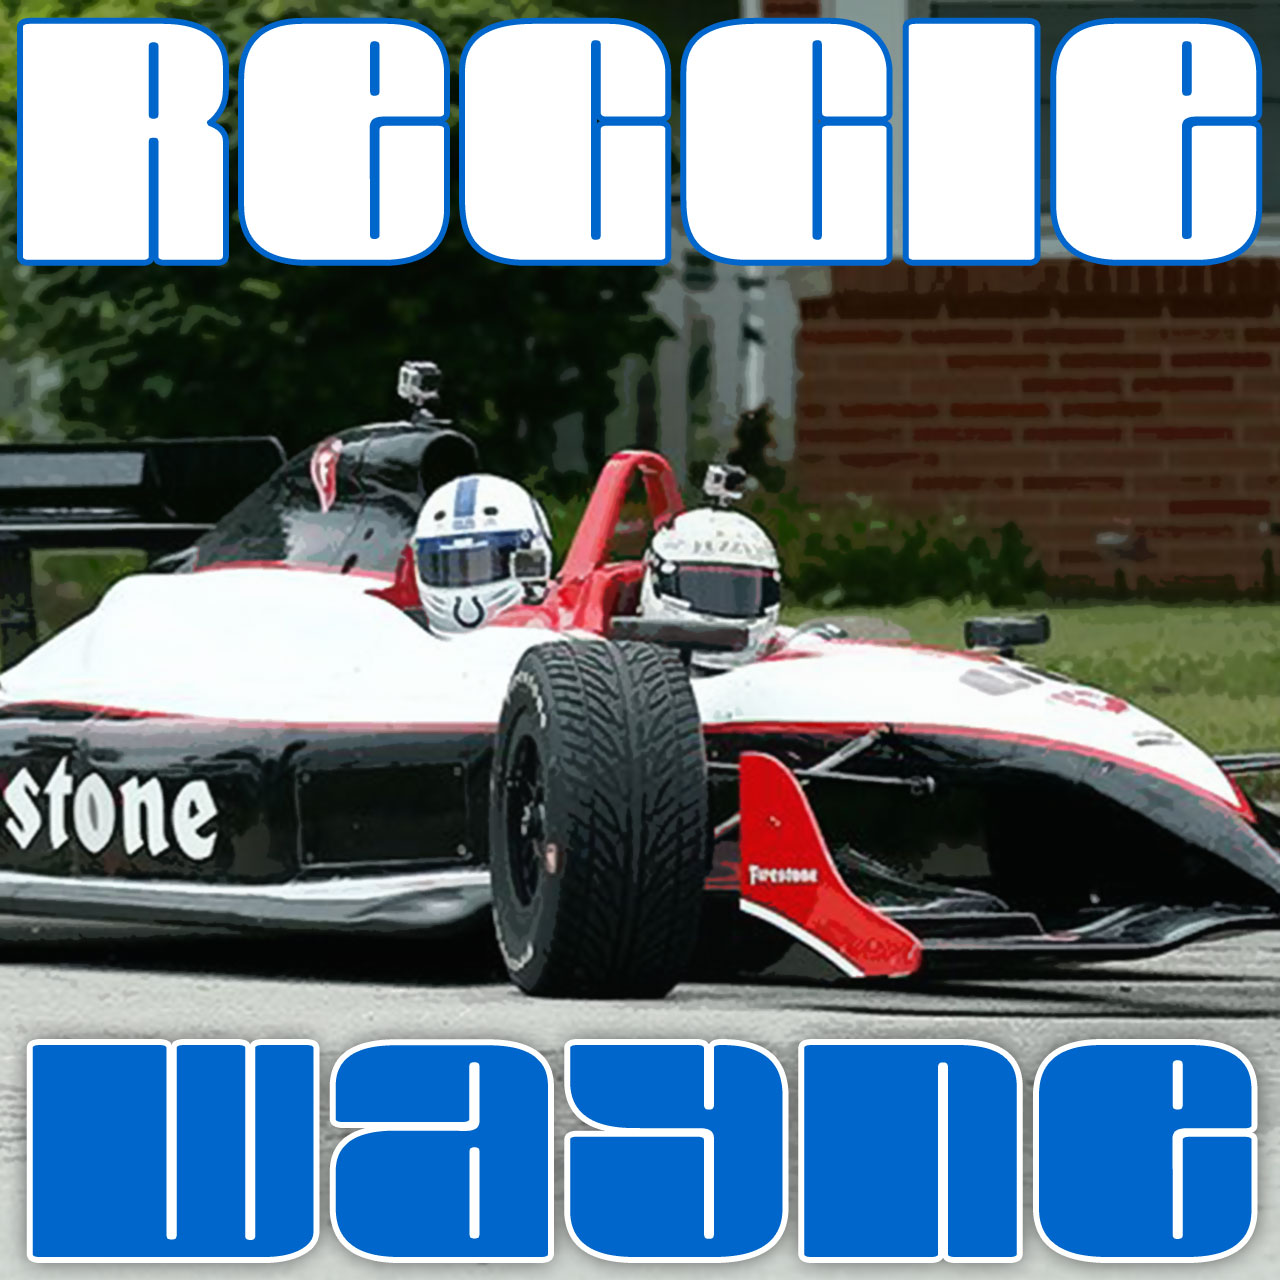 Reggie Wayne shows up at Colts camp in an IndyCar driven by Ed Carpenter